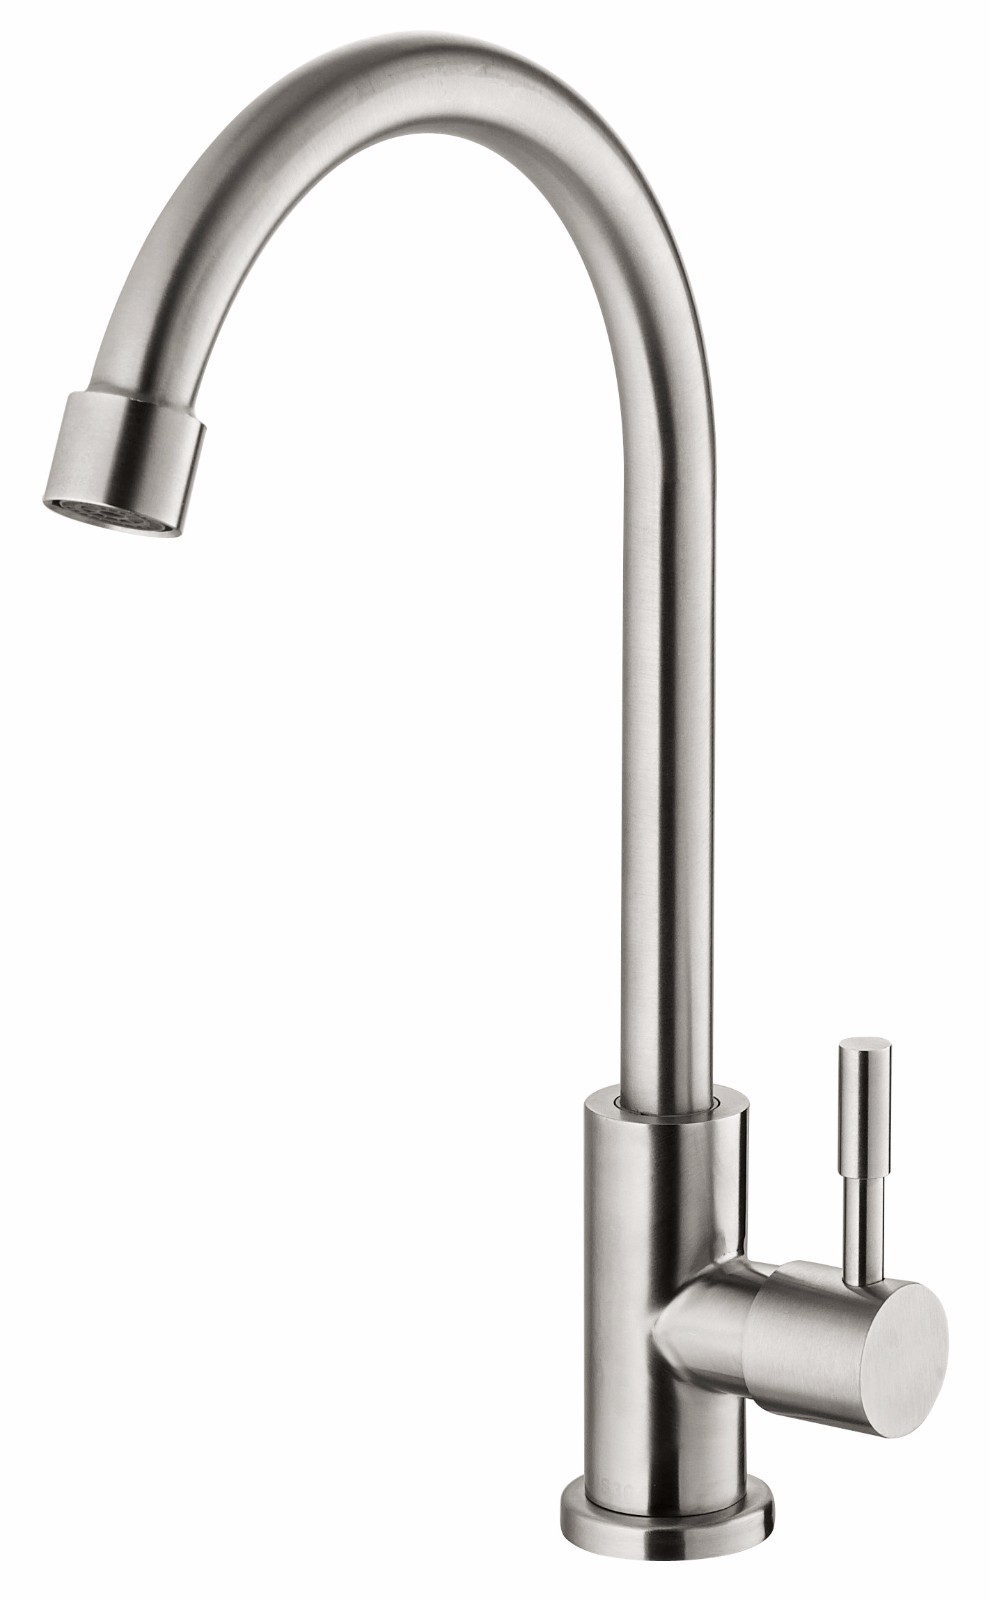  Cold Kitchen Faucets